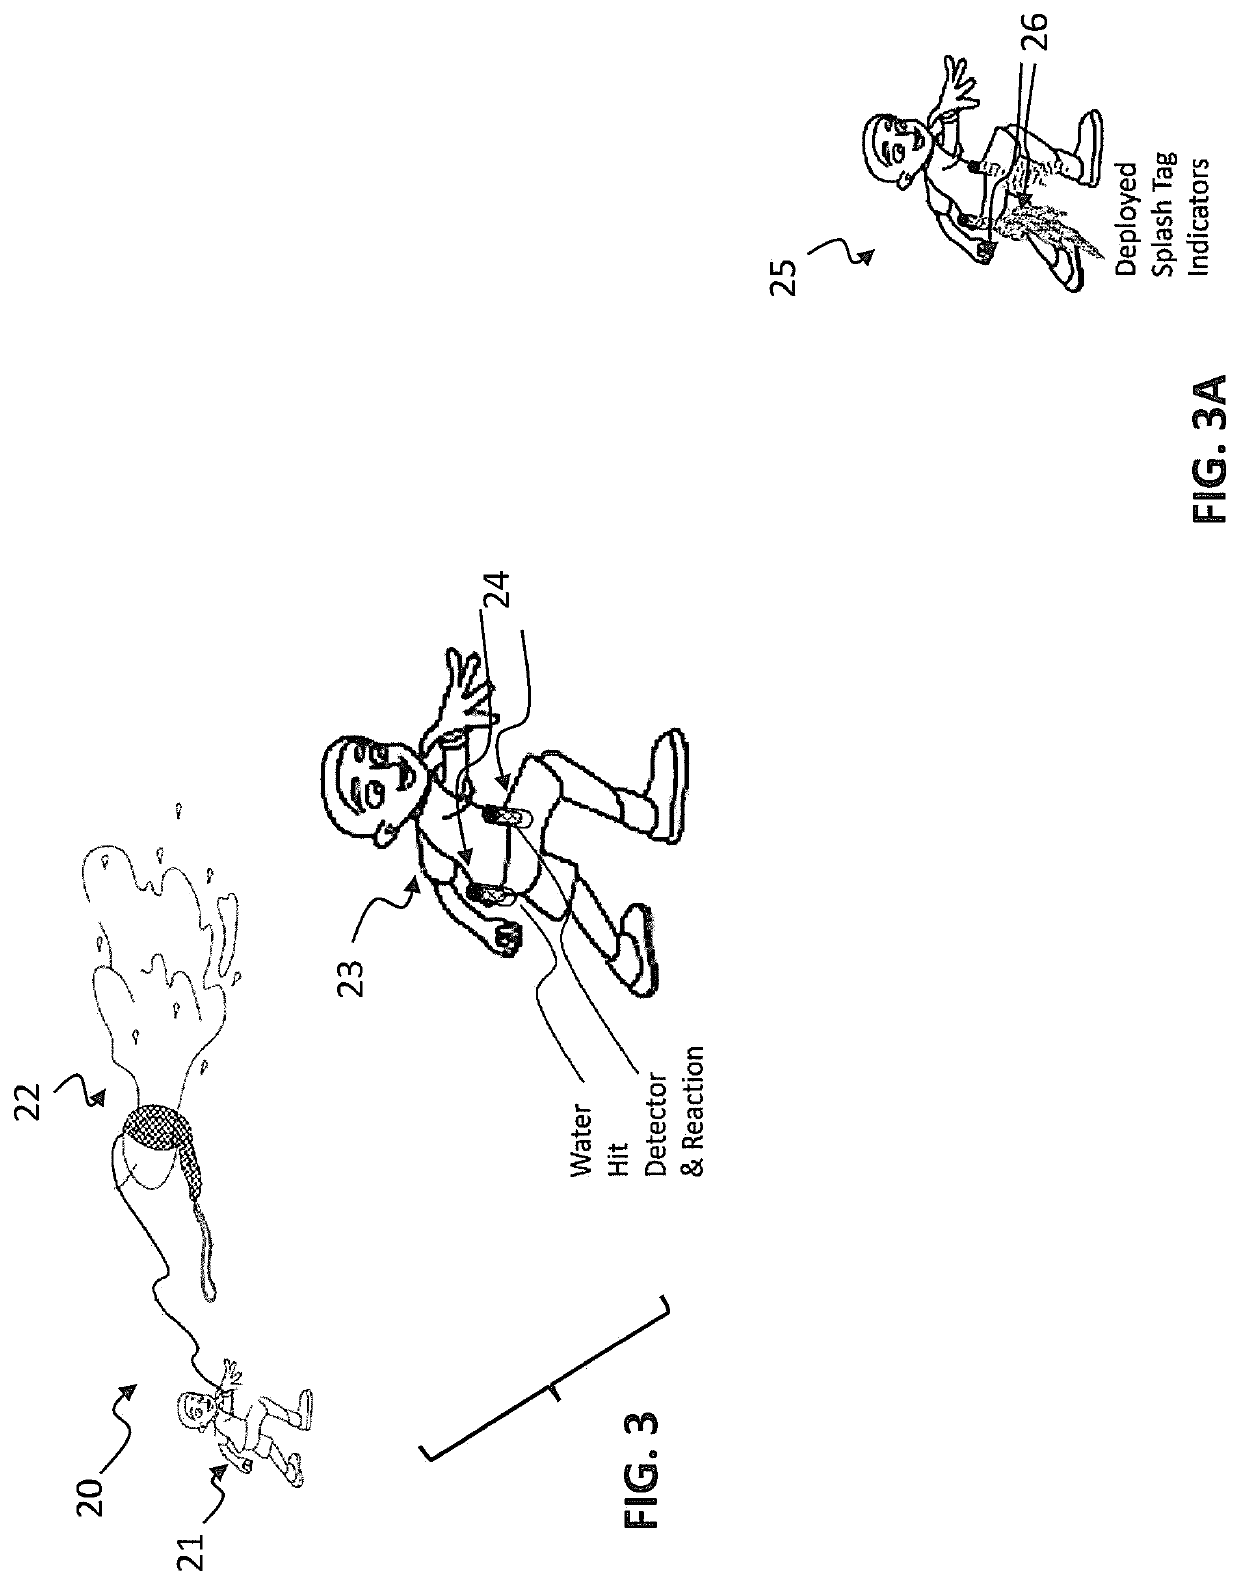 Apparatus and method for detecting and reacting to the presence of a fluid